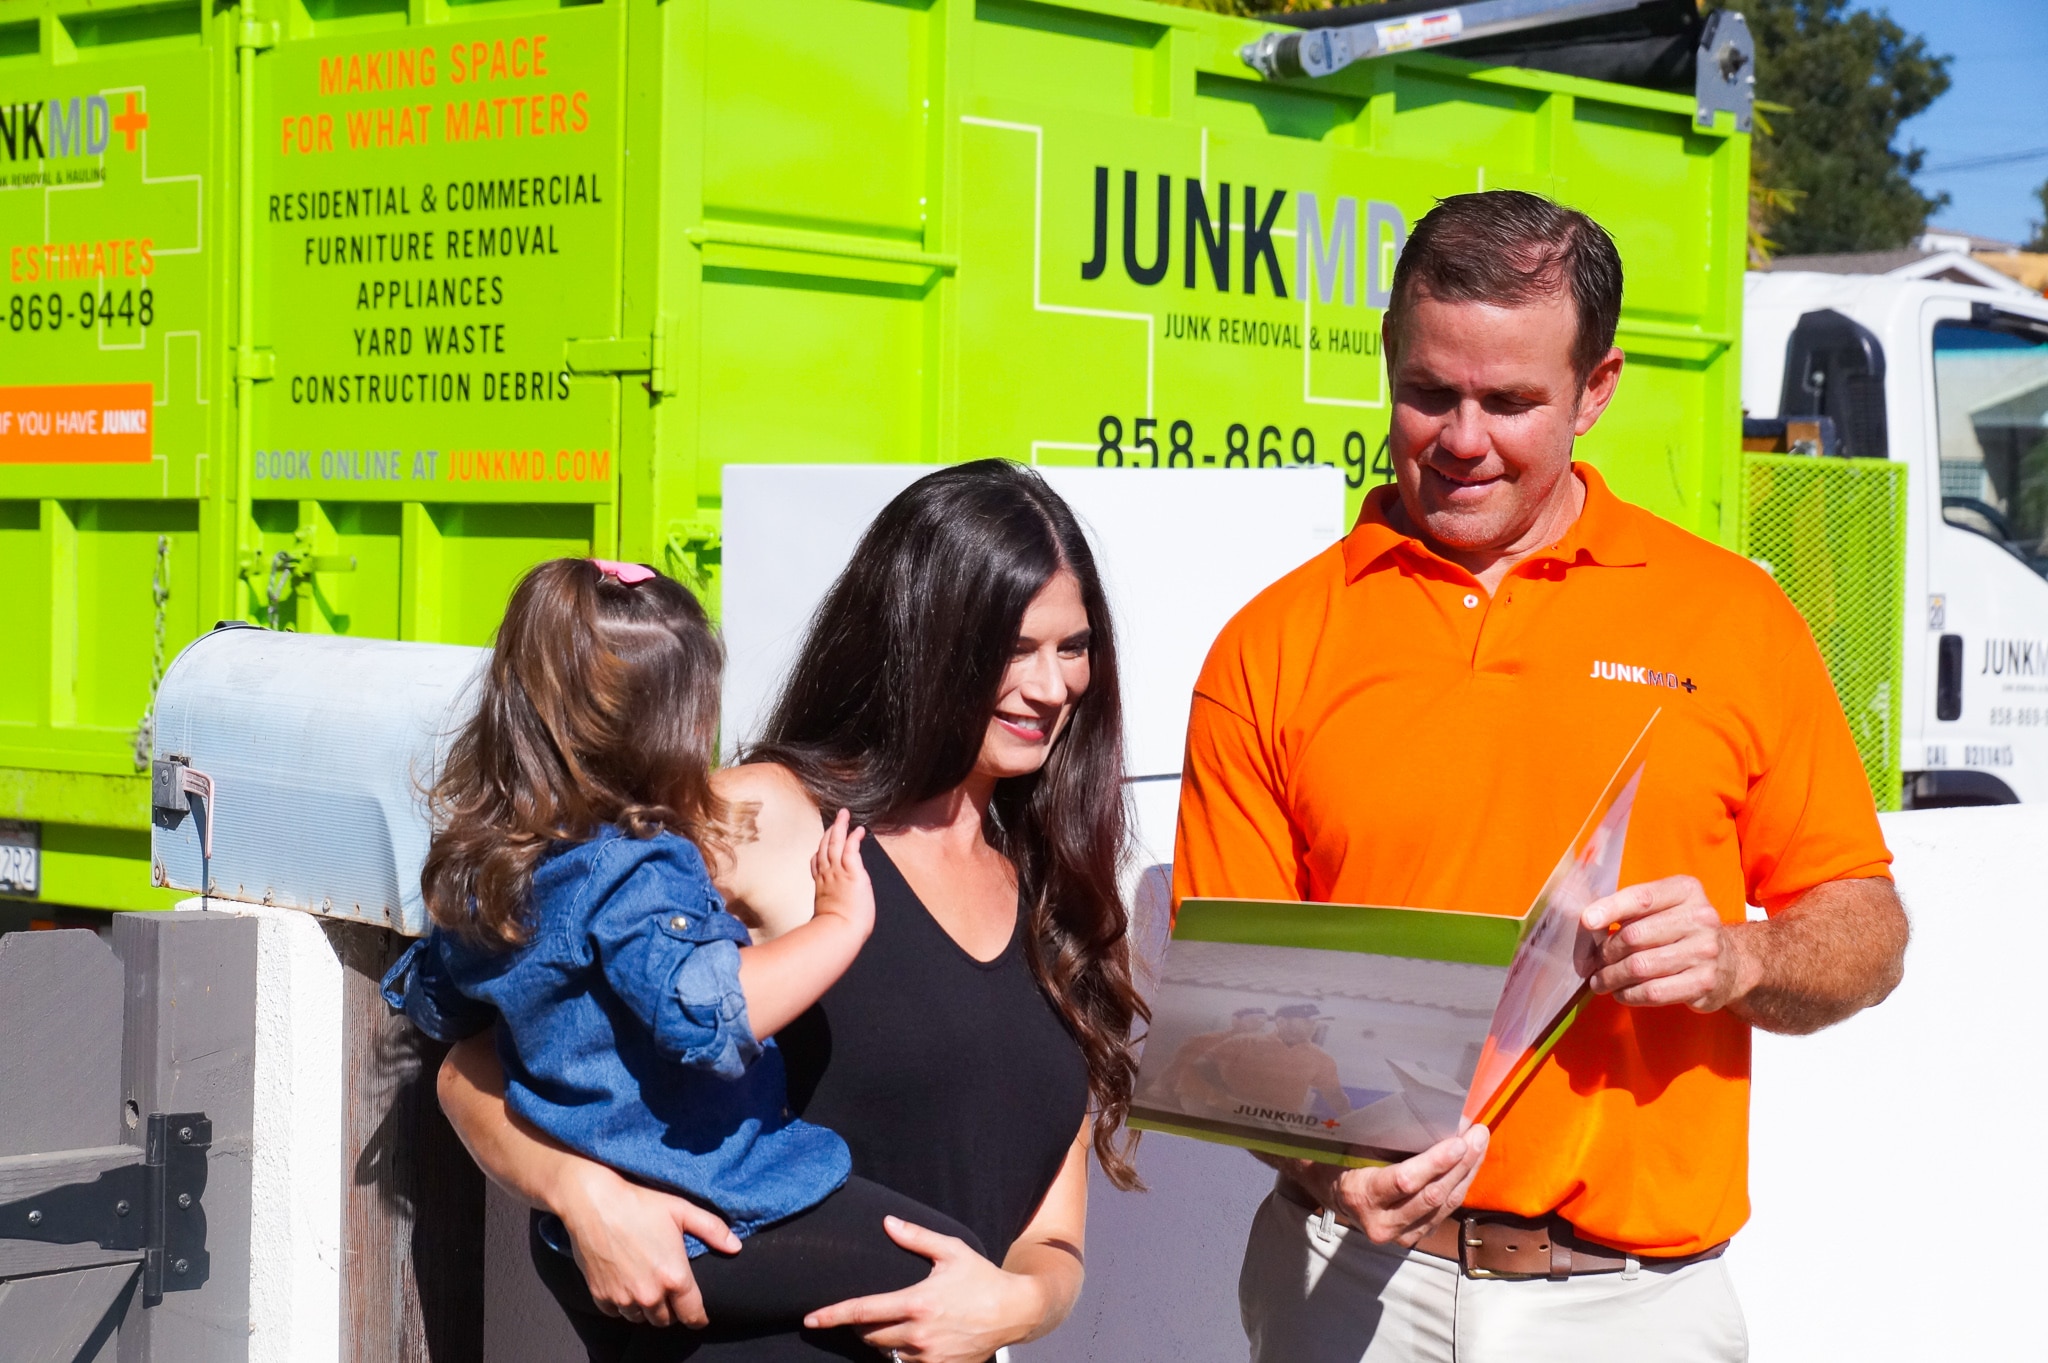 explaining how Junk MD helps you with your junks